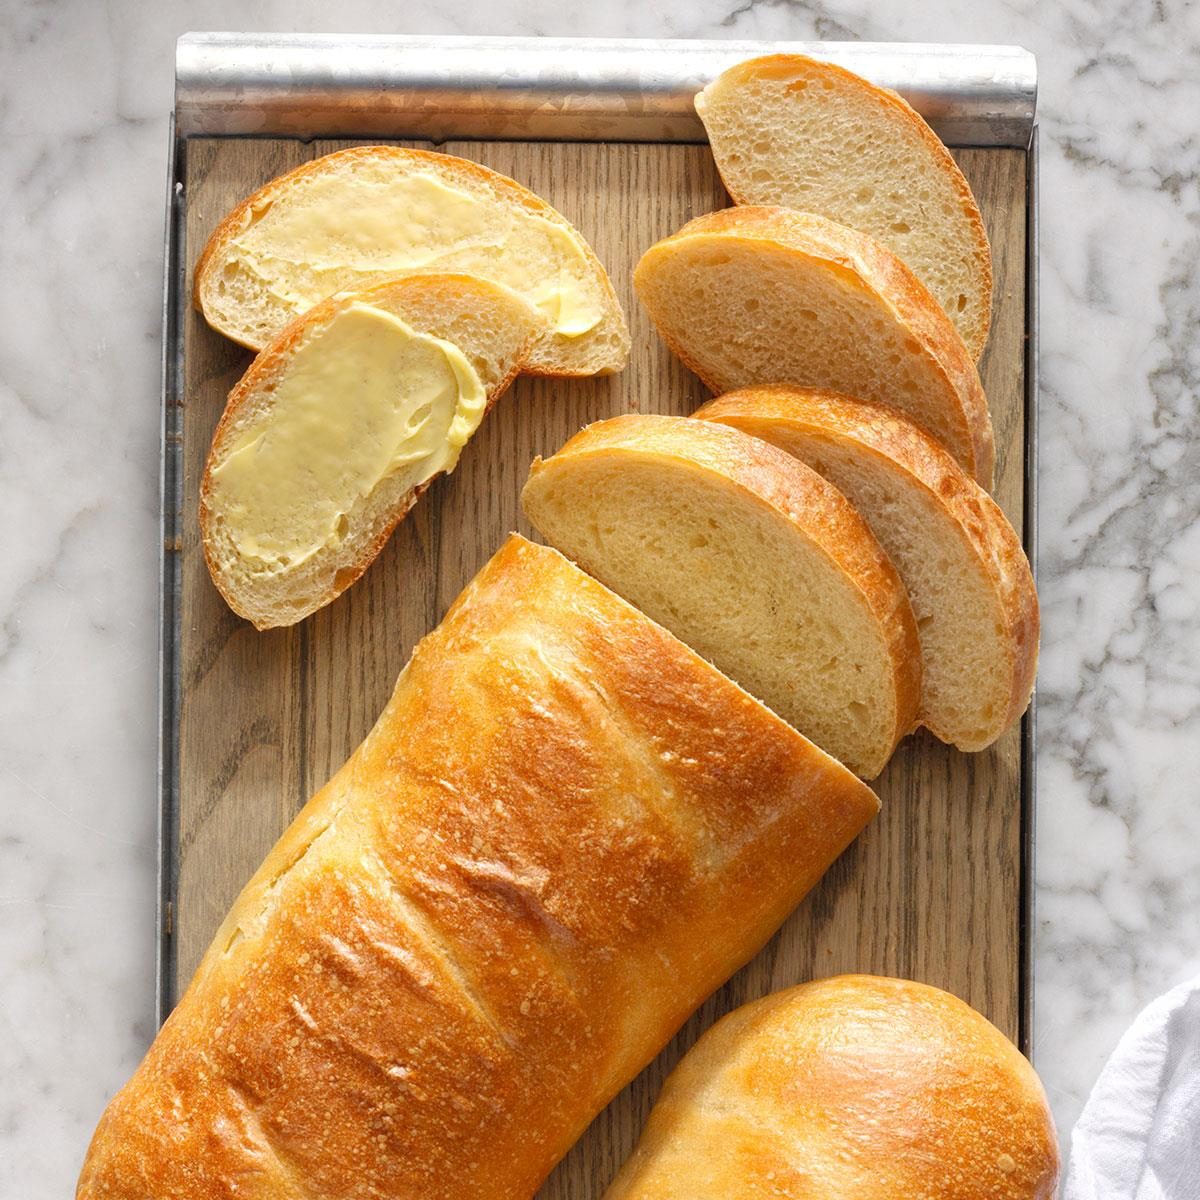 Sourdough French Bread Recipe: How to Make It